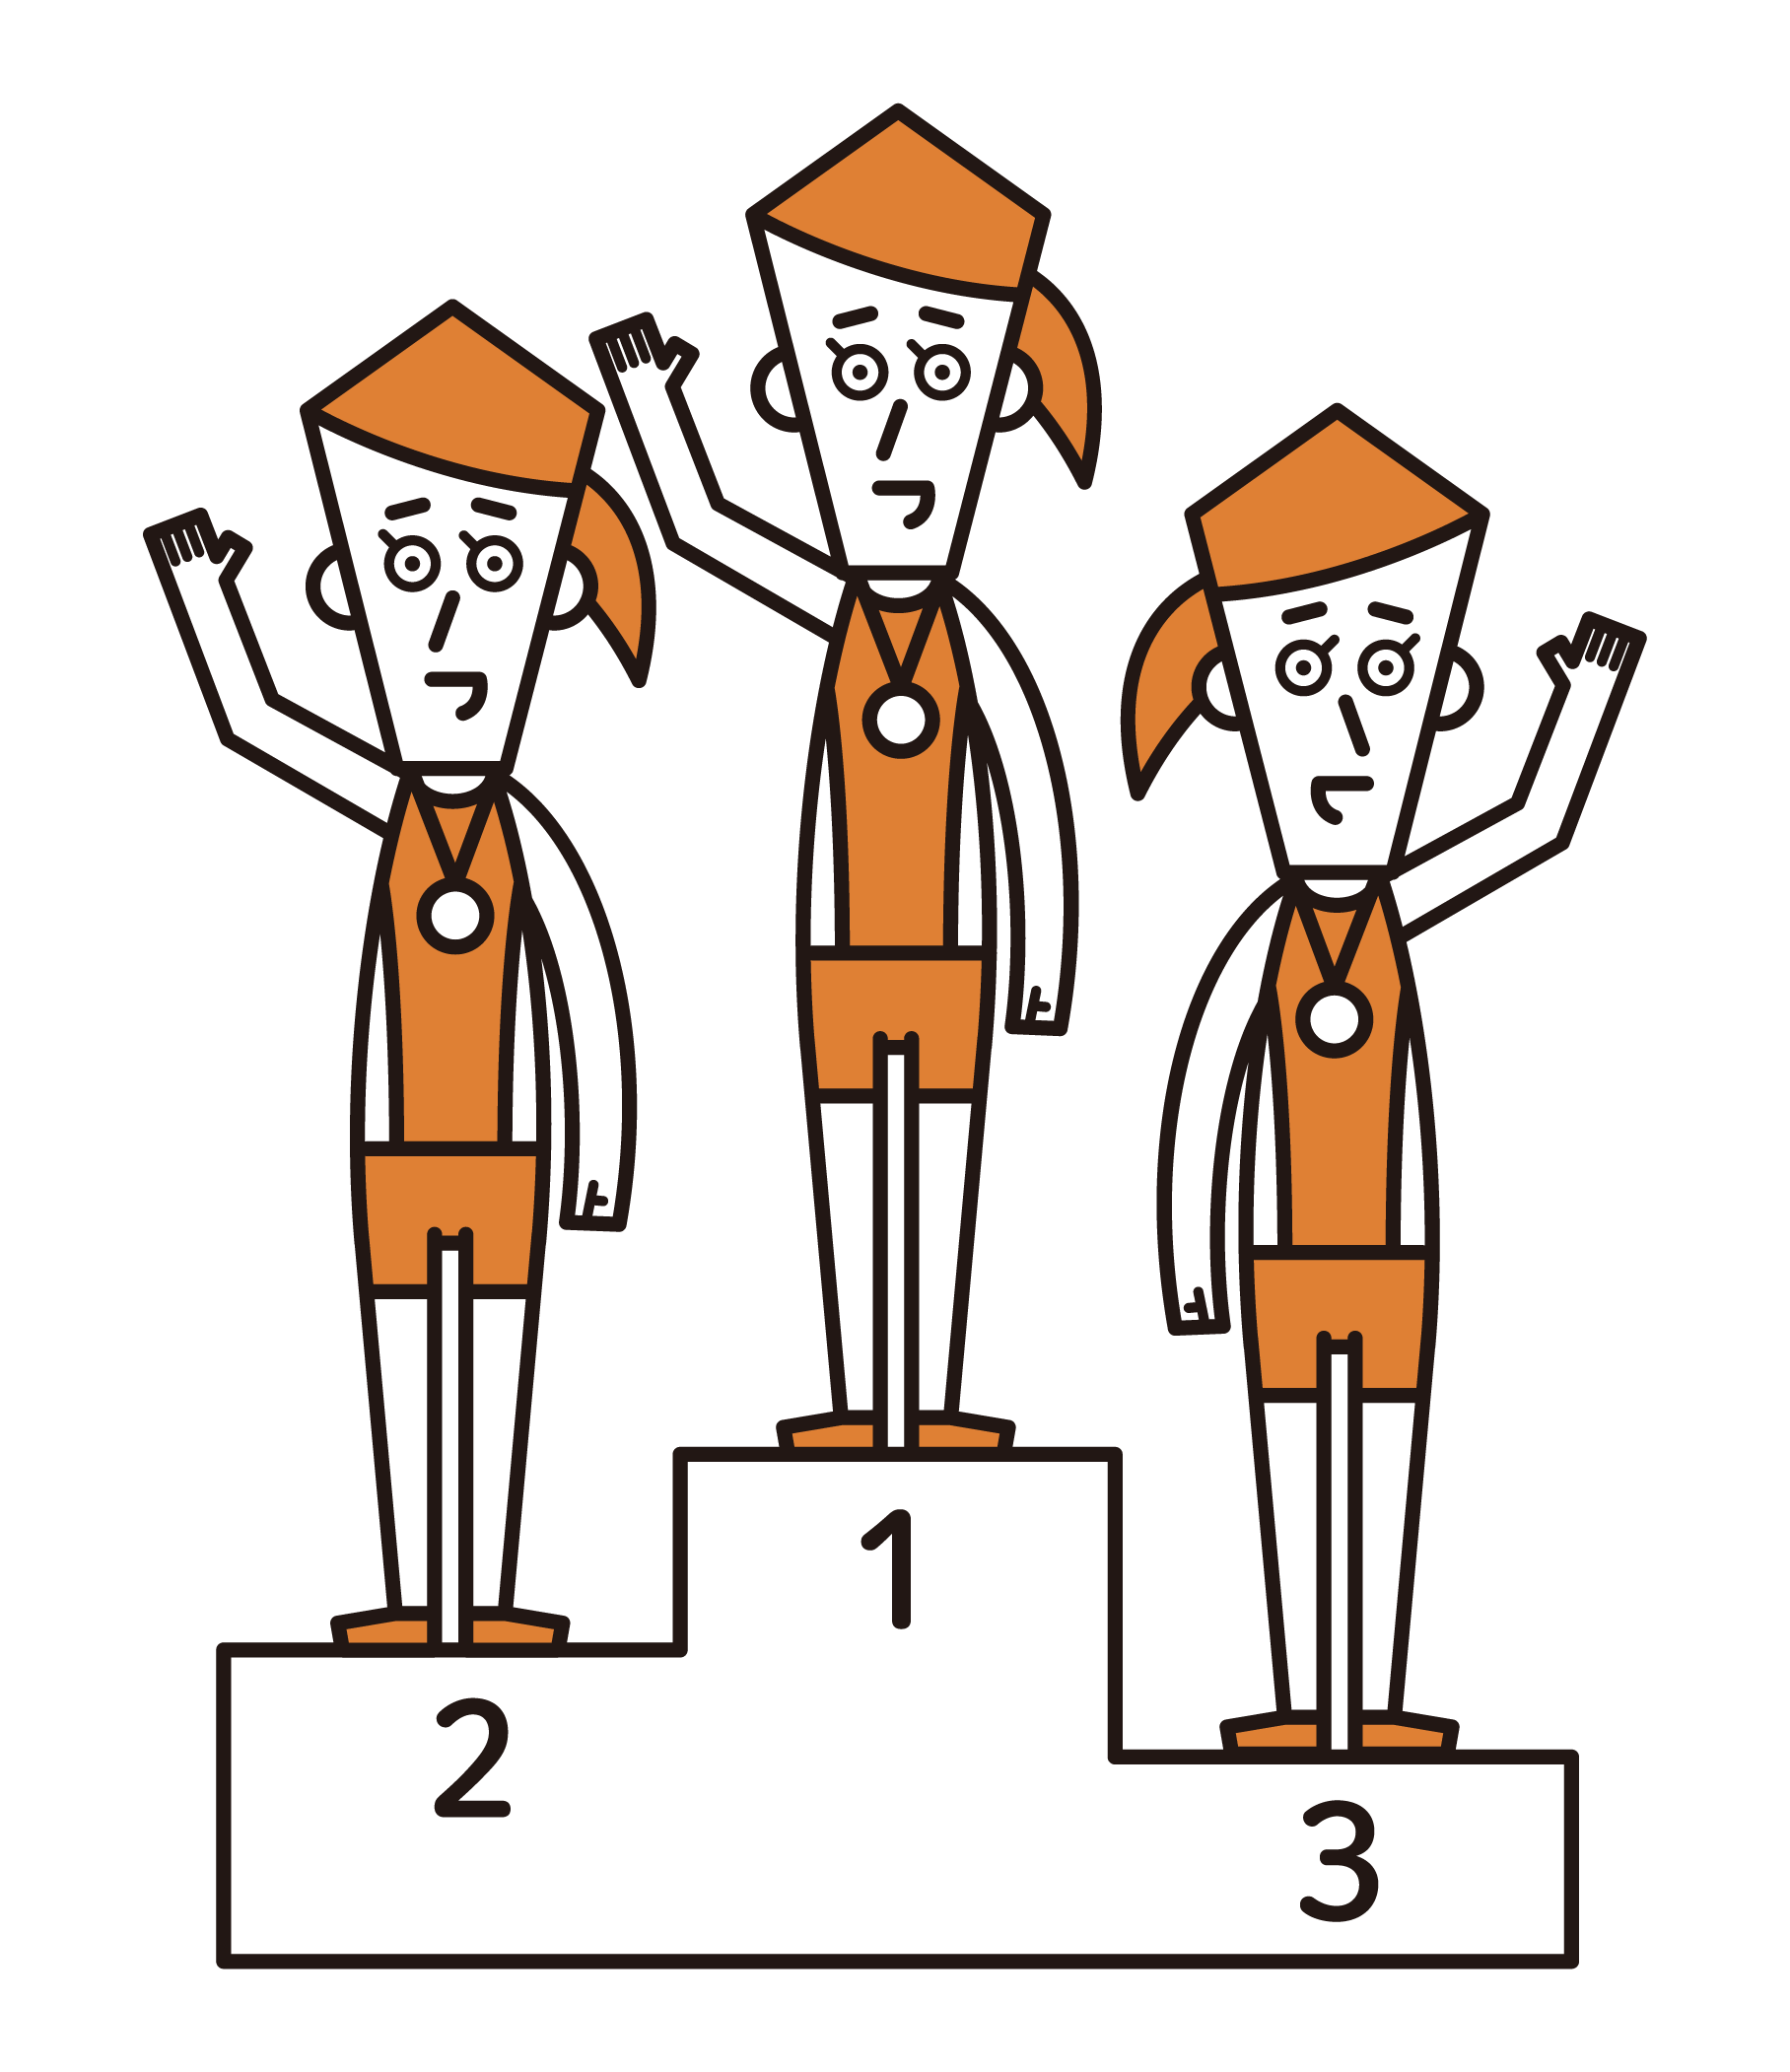 Illustration of a player (female) waving on the podium